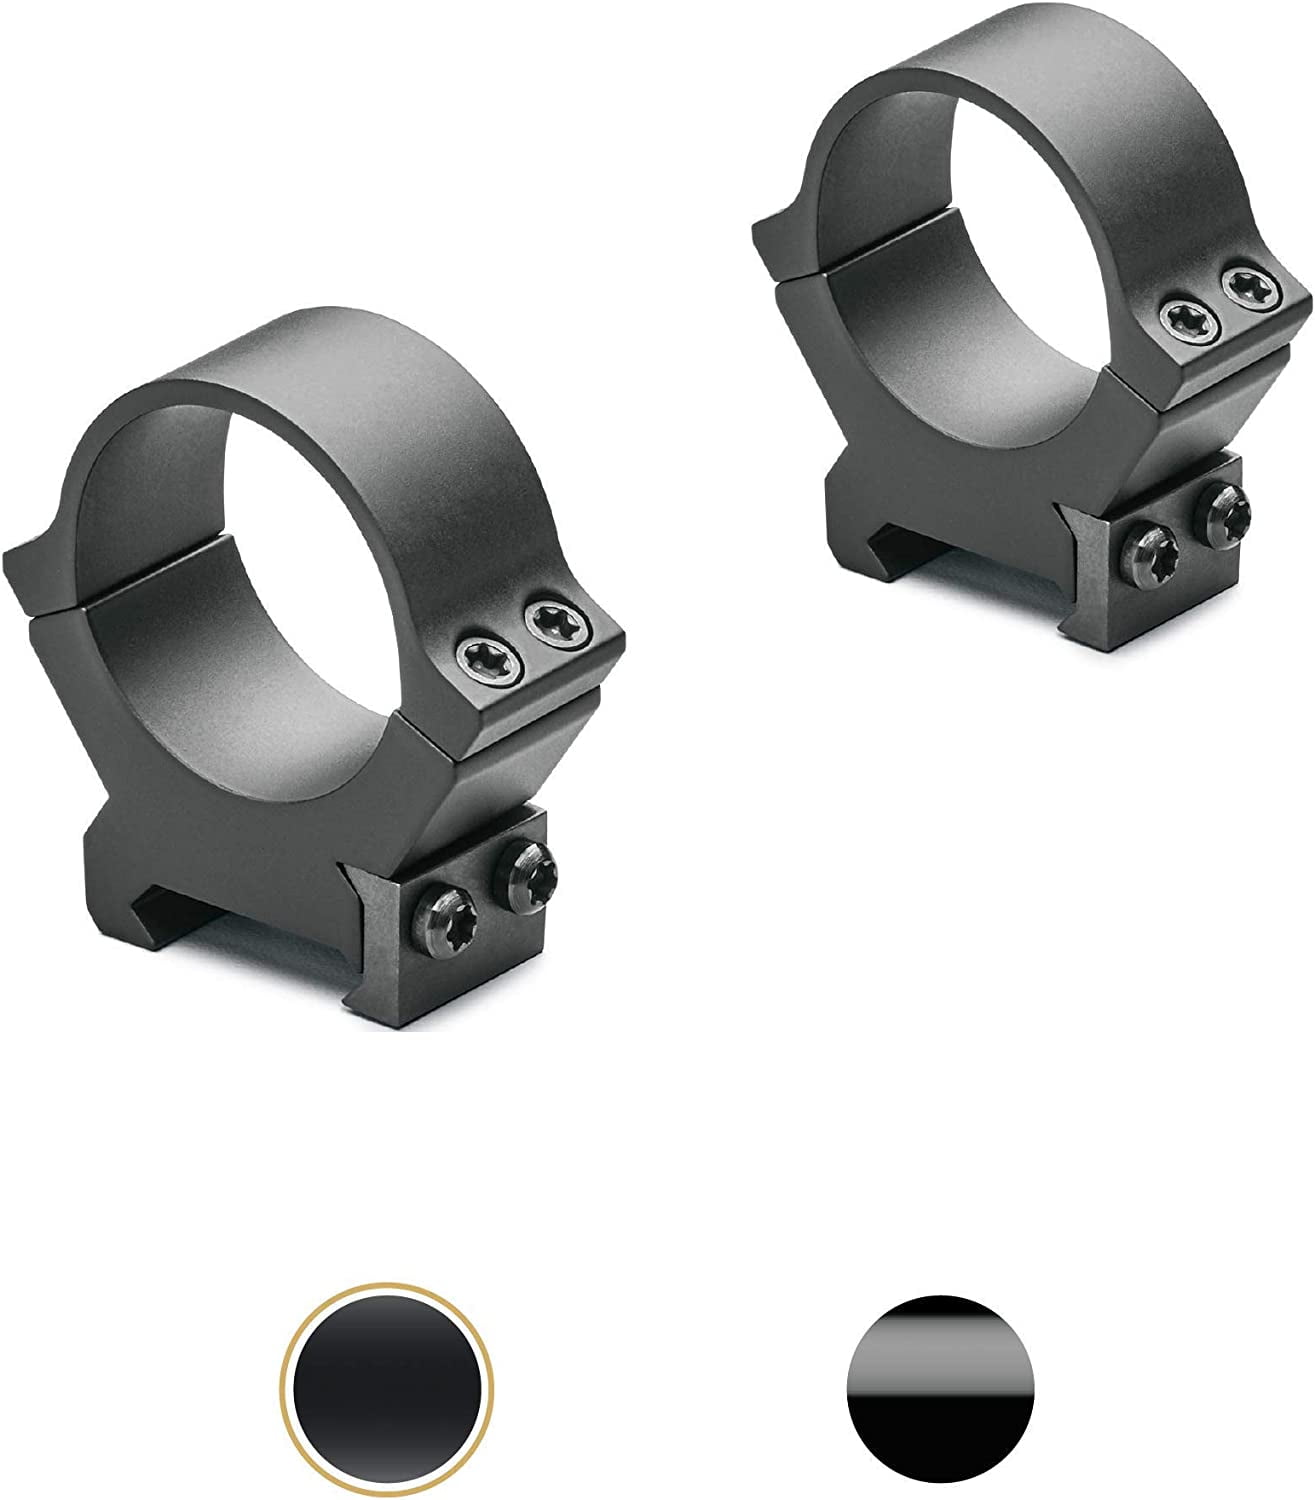 Leupold Prw2 Scope Rings 30mm High Matte Black 174085 for sale online 